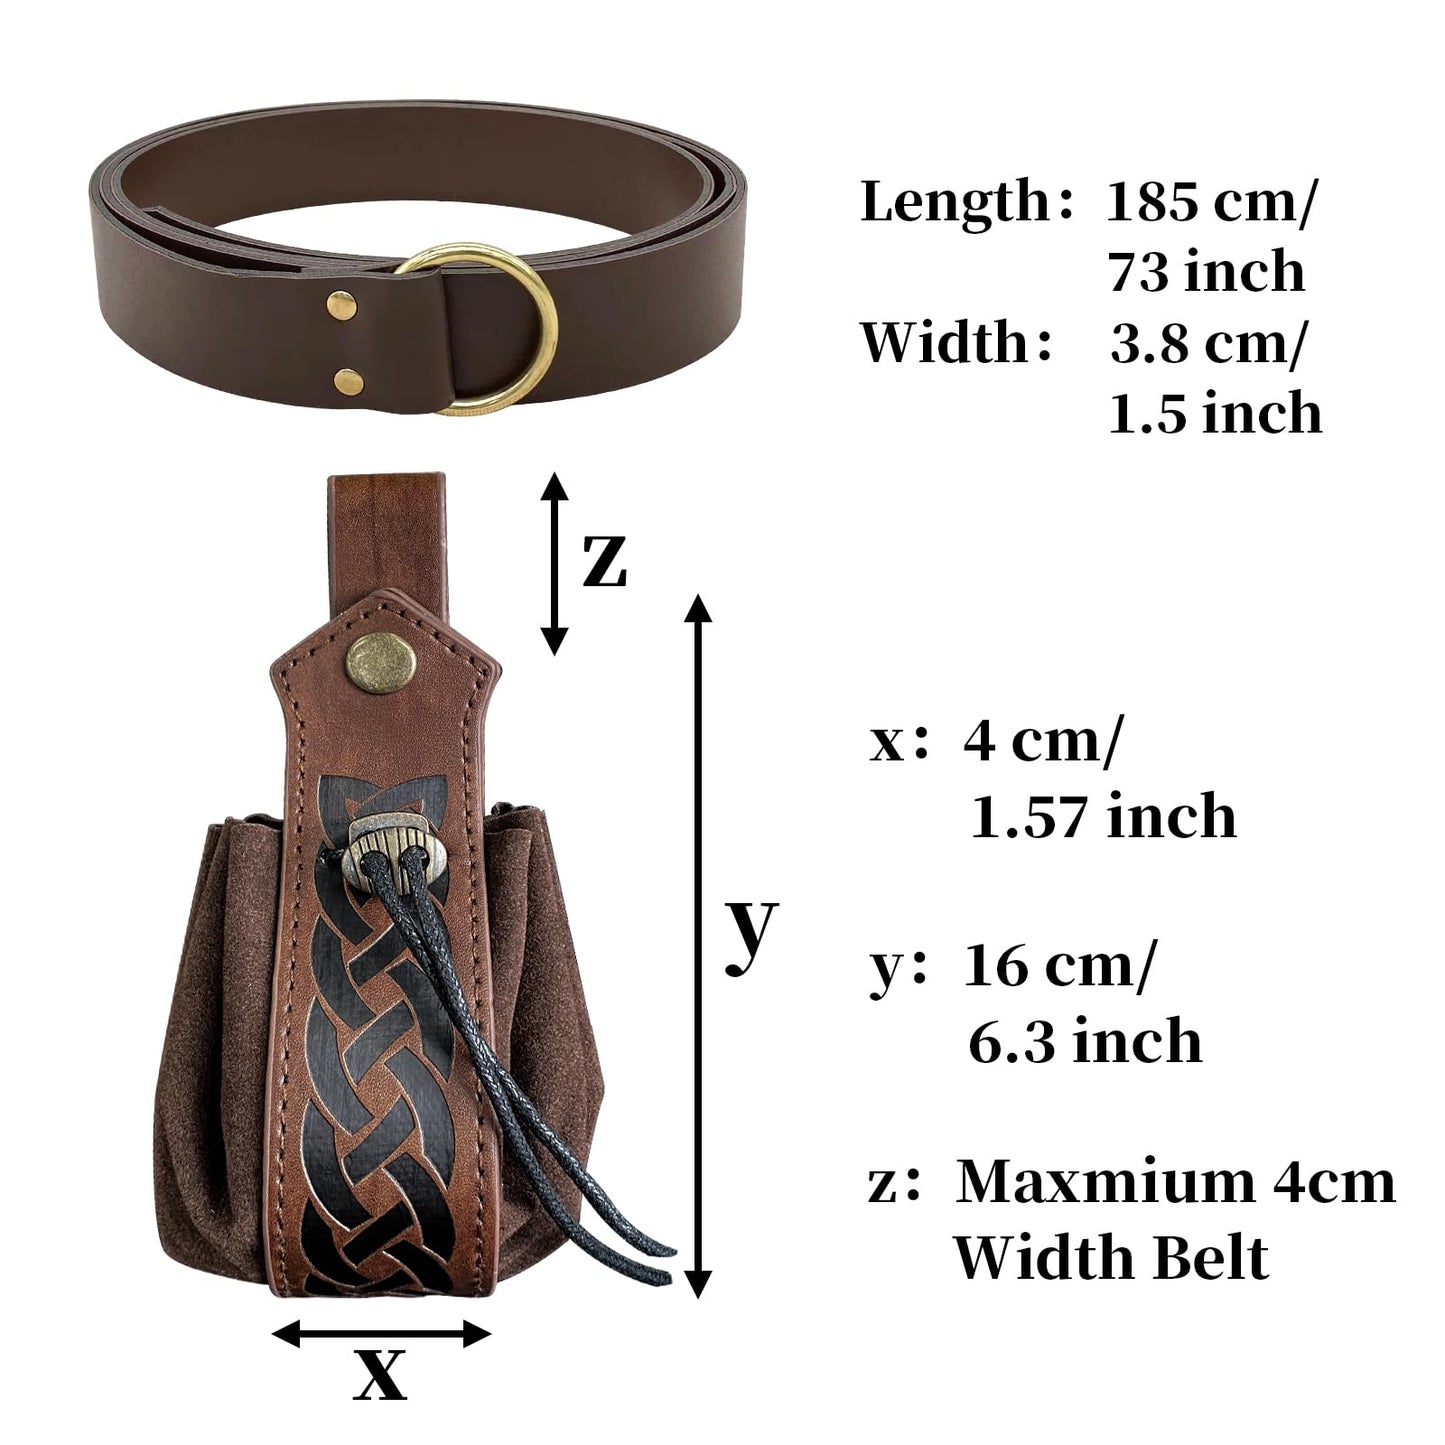 HiiFeuer Medieval O Ring Belt with Portable Drawstring Pouch, Retro Renaissance Faux Leather Belt and Purse Set for LARP Brown C